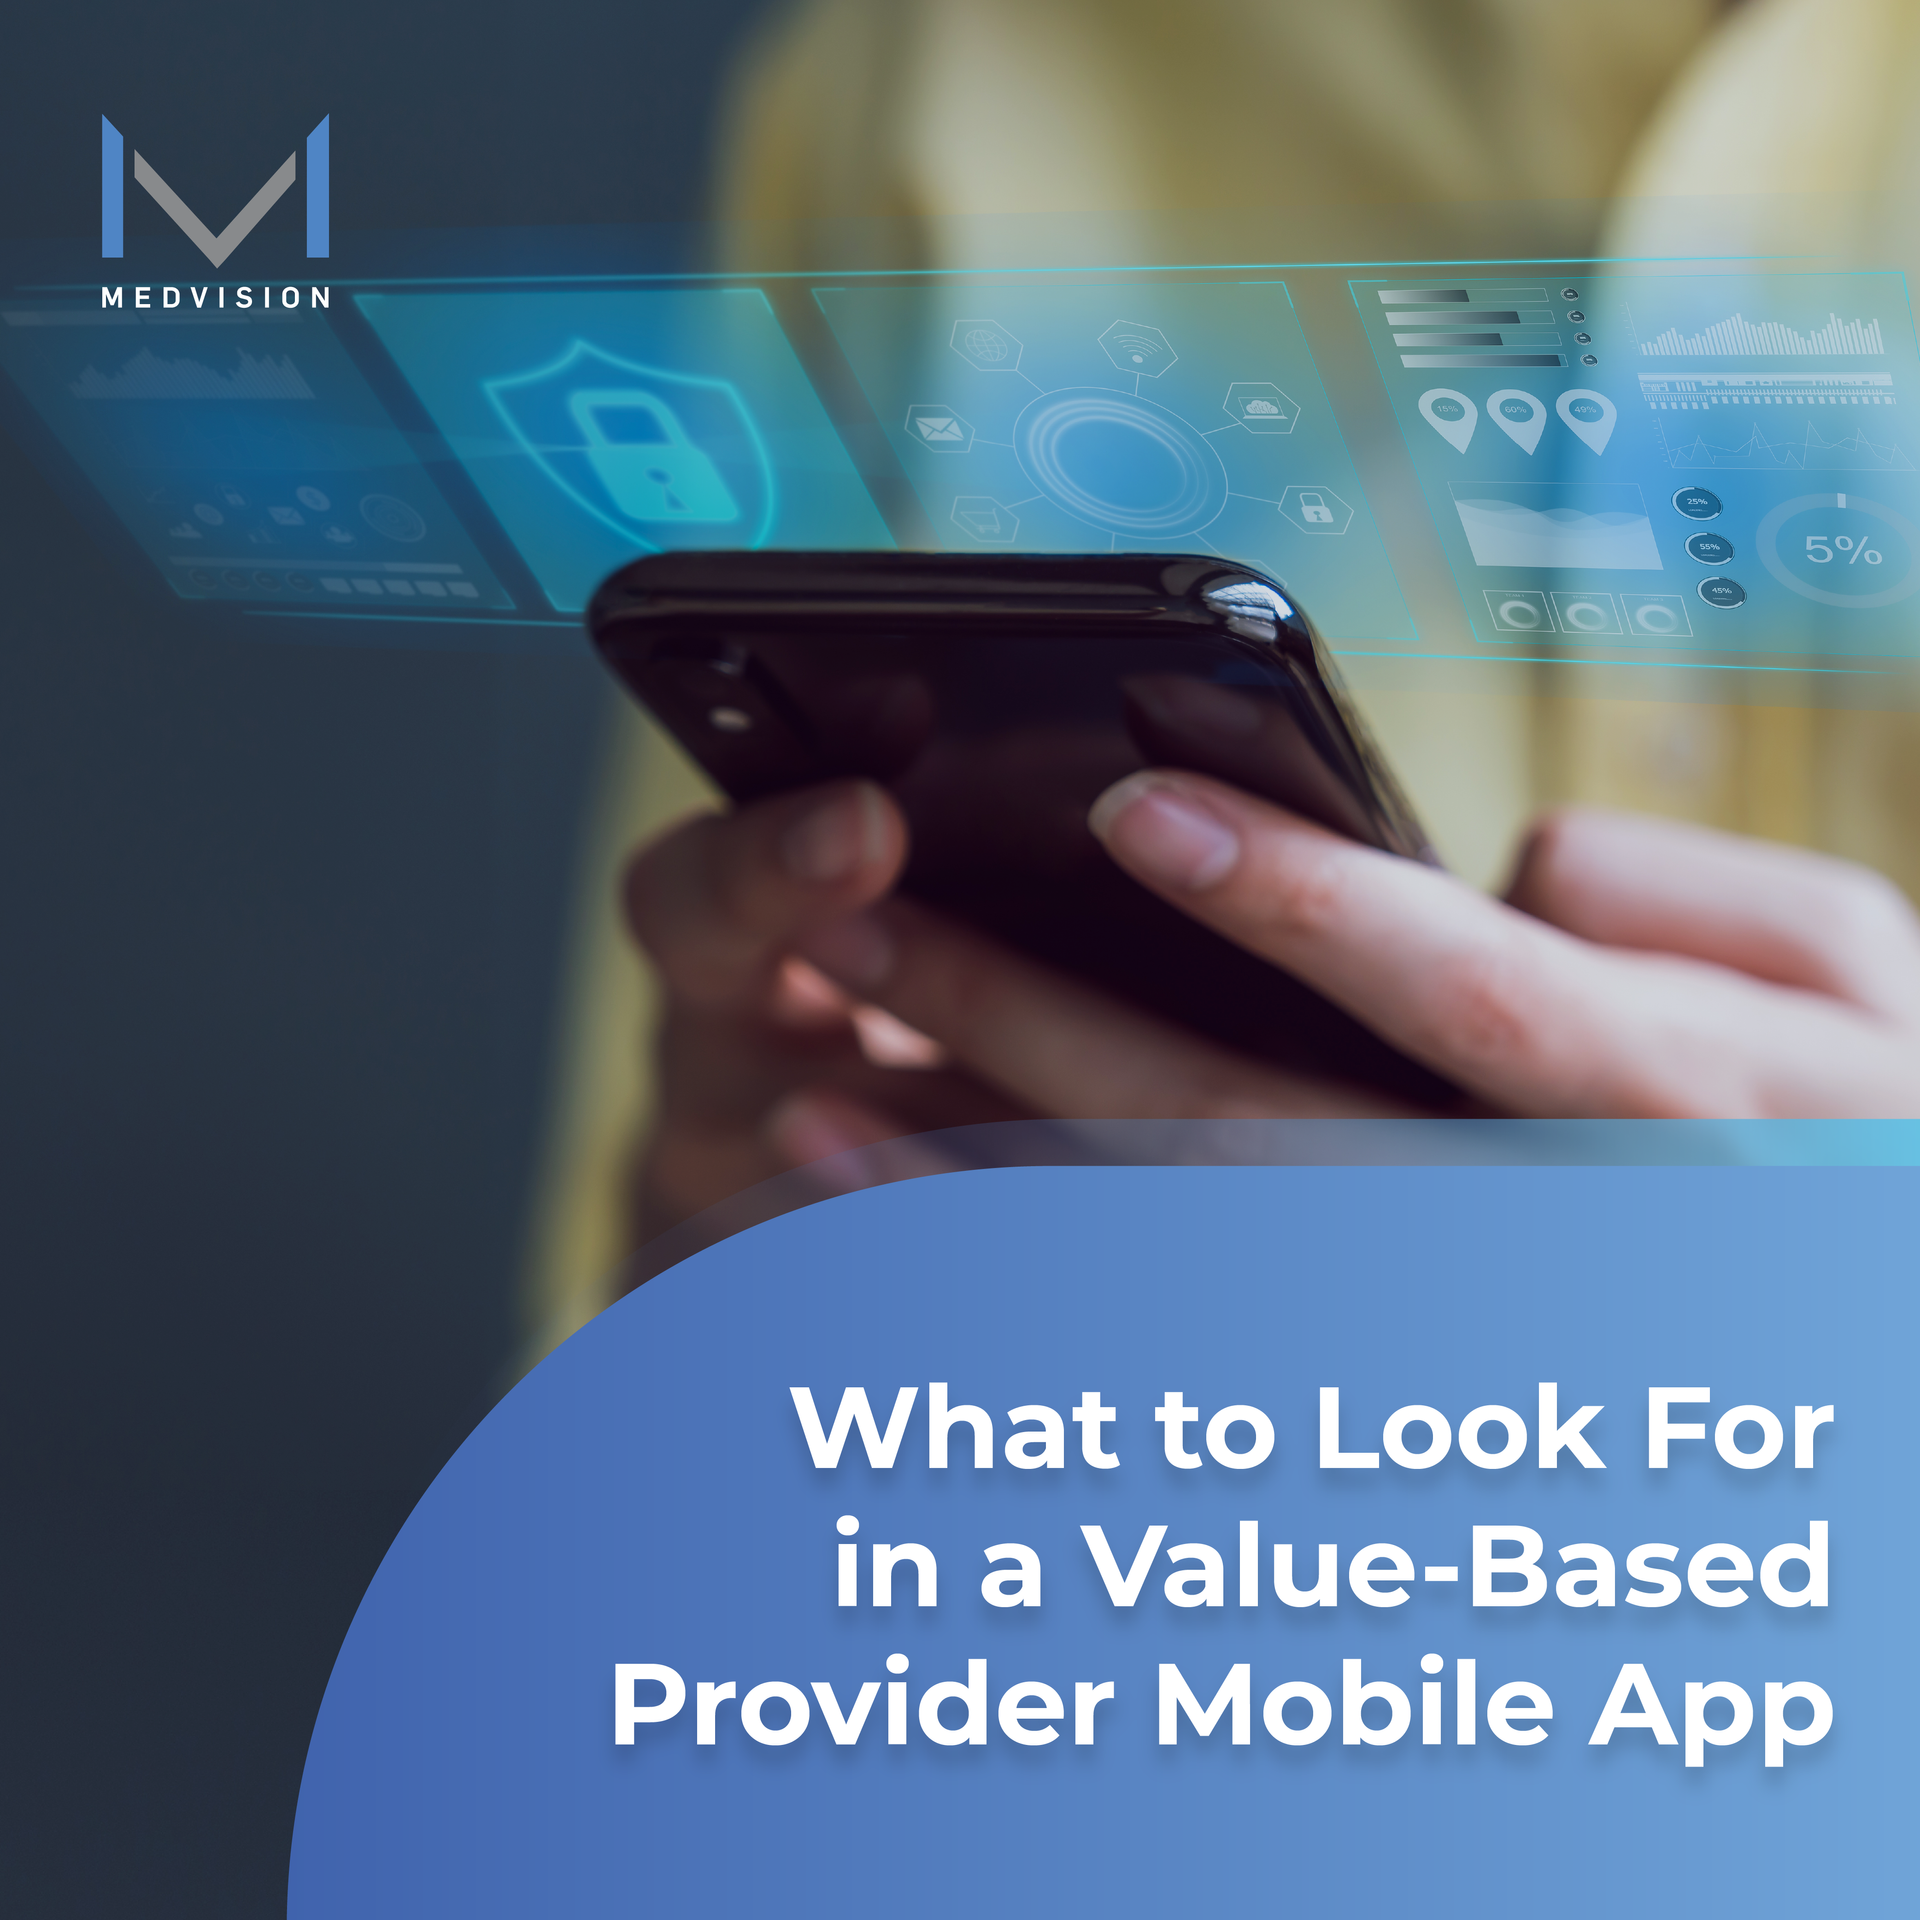 What to Look For in a Value-Based Provider Mobile App